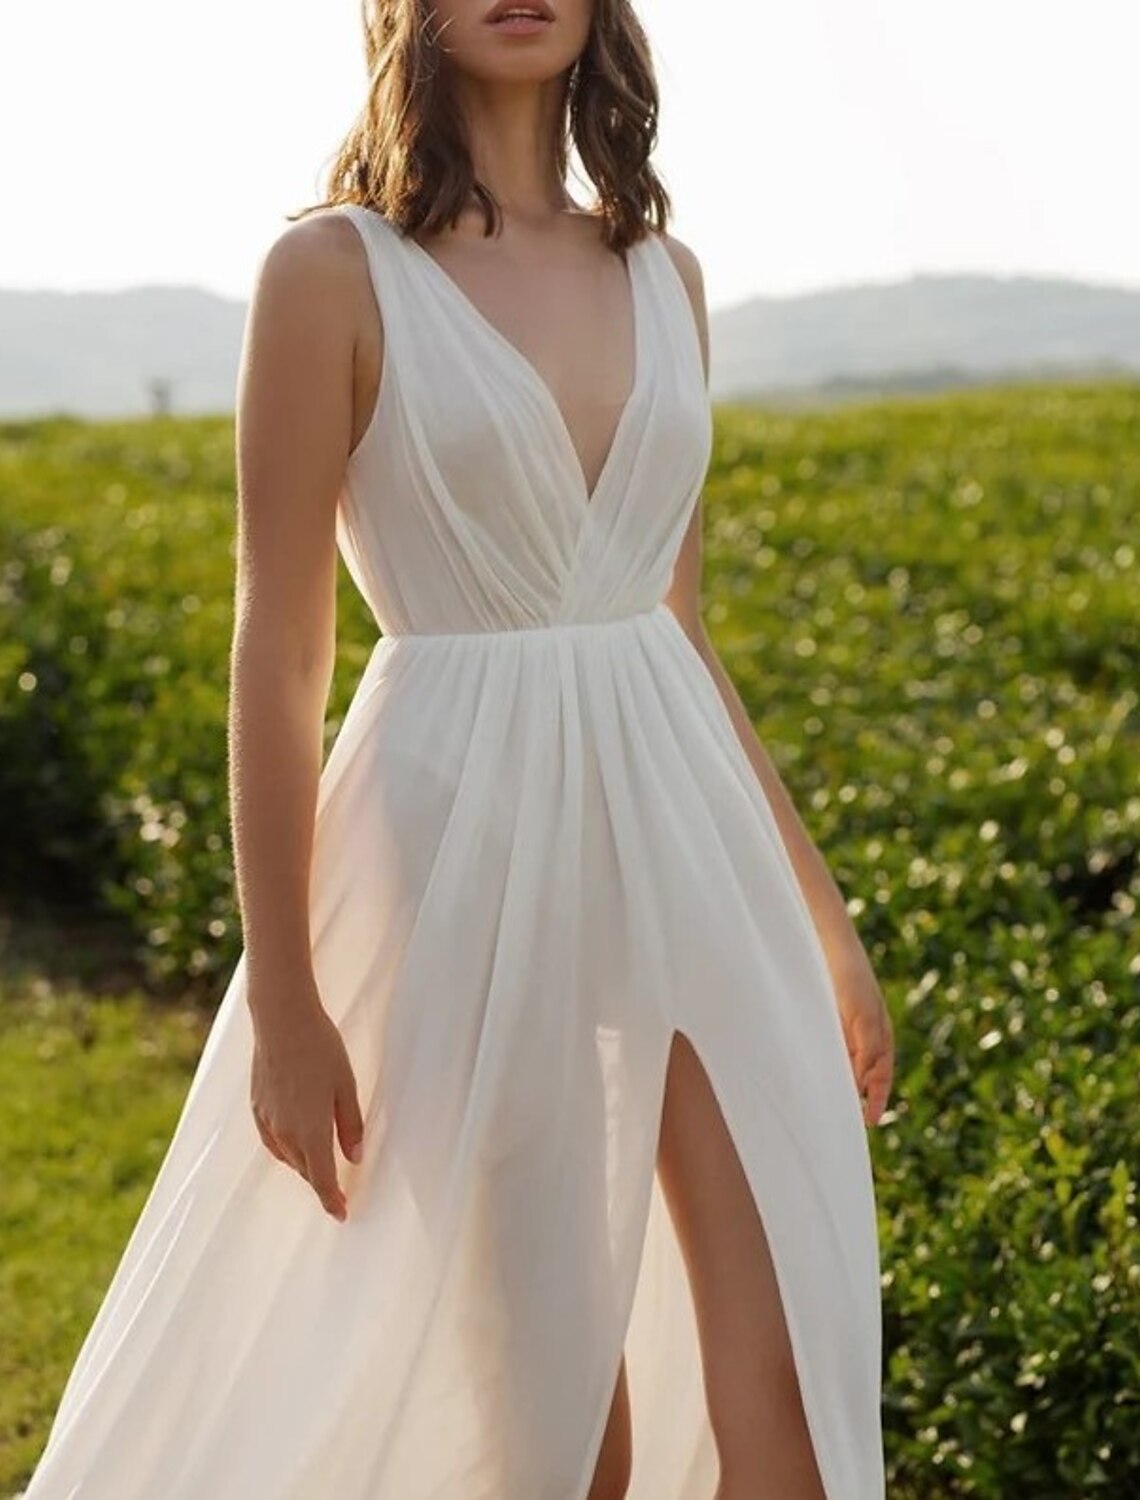 Reception Sexy Casual Wedding Dresses A-Line V Neck Sleeveless Court Train Chiffon Bridal Gowns With Split Front Solid Color Summer Wedding Party